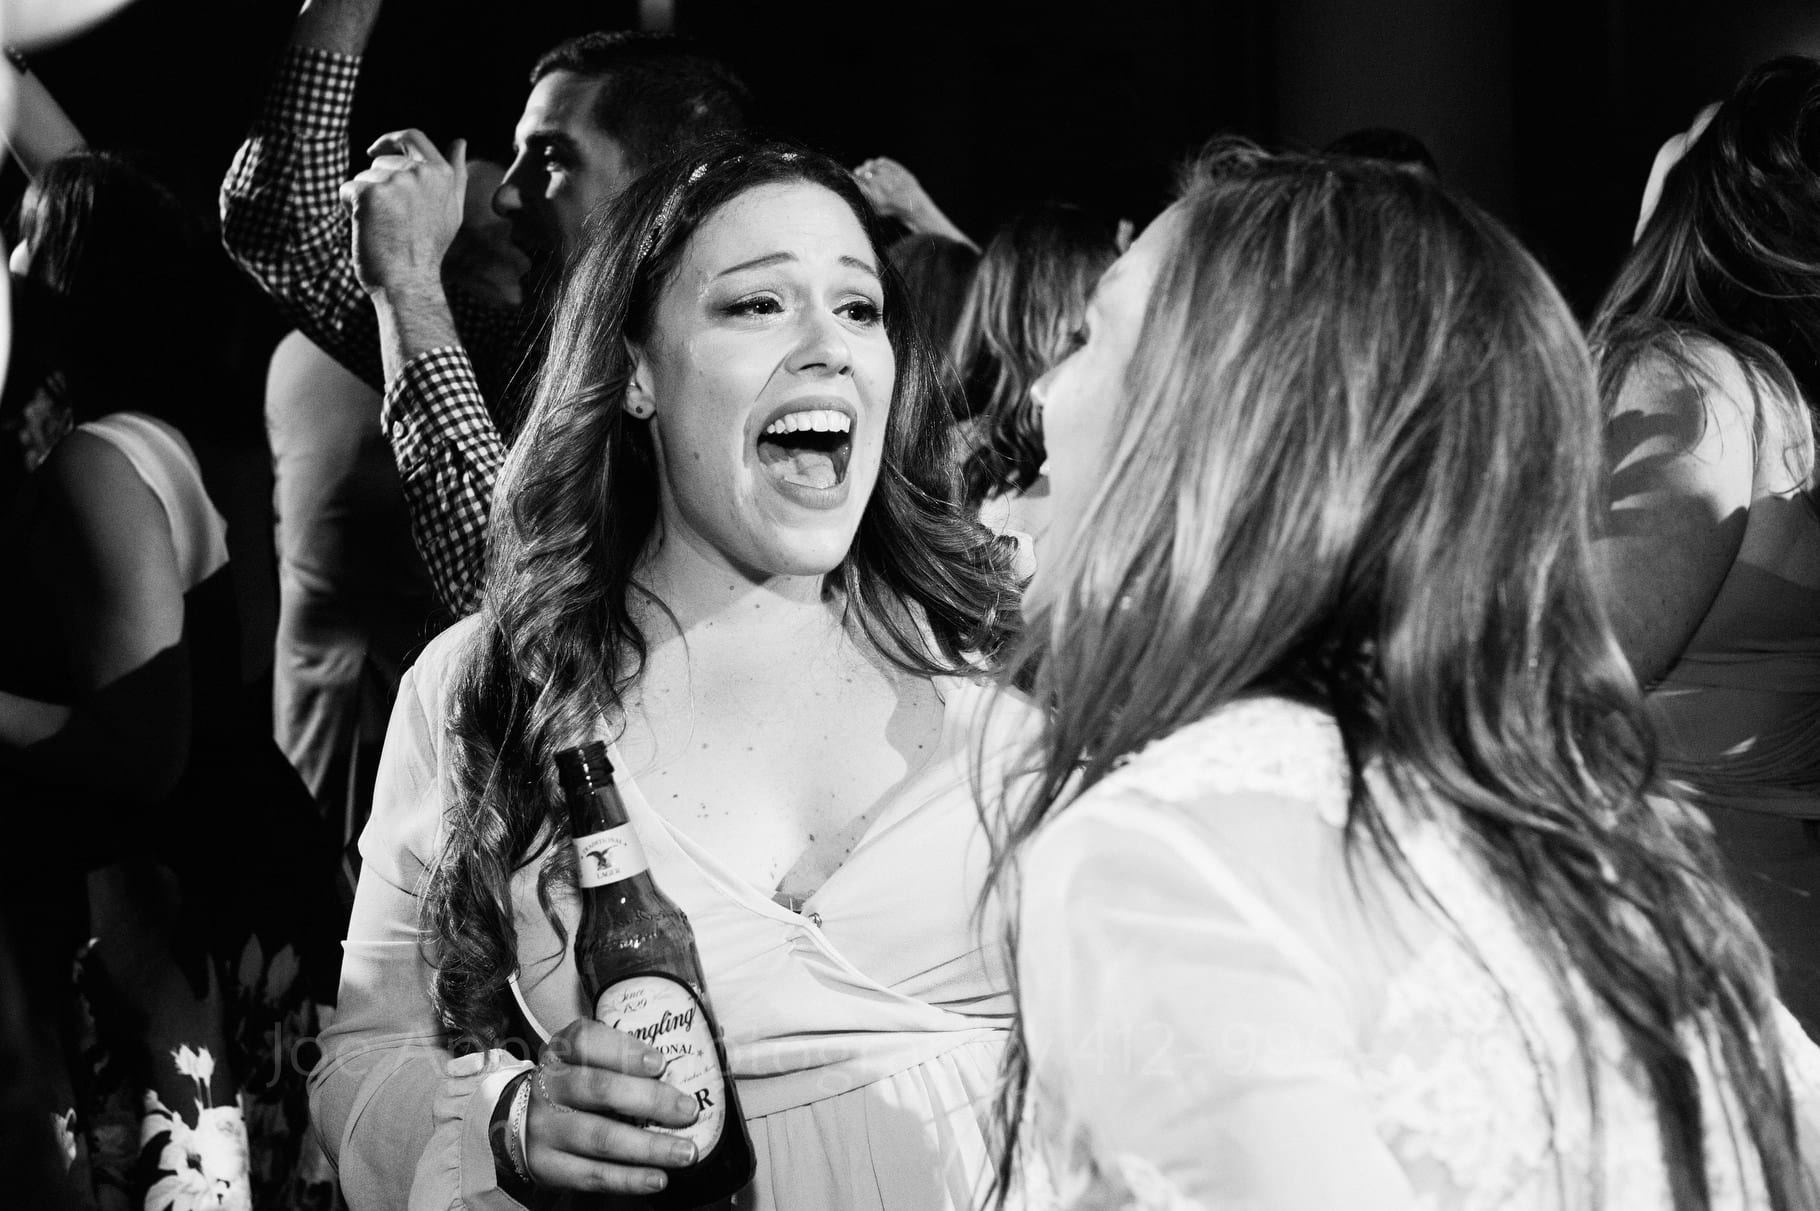 A bridesmaid holds a bottle of beer as she sings along with a bride on the dancefloor at her wedding reception.